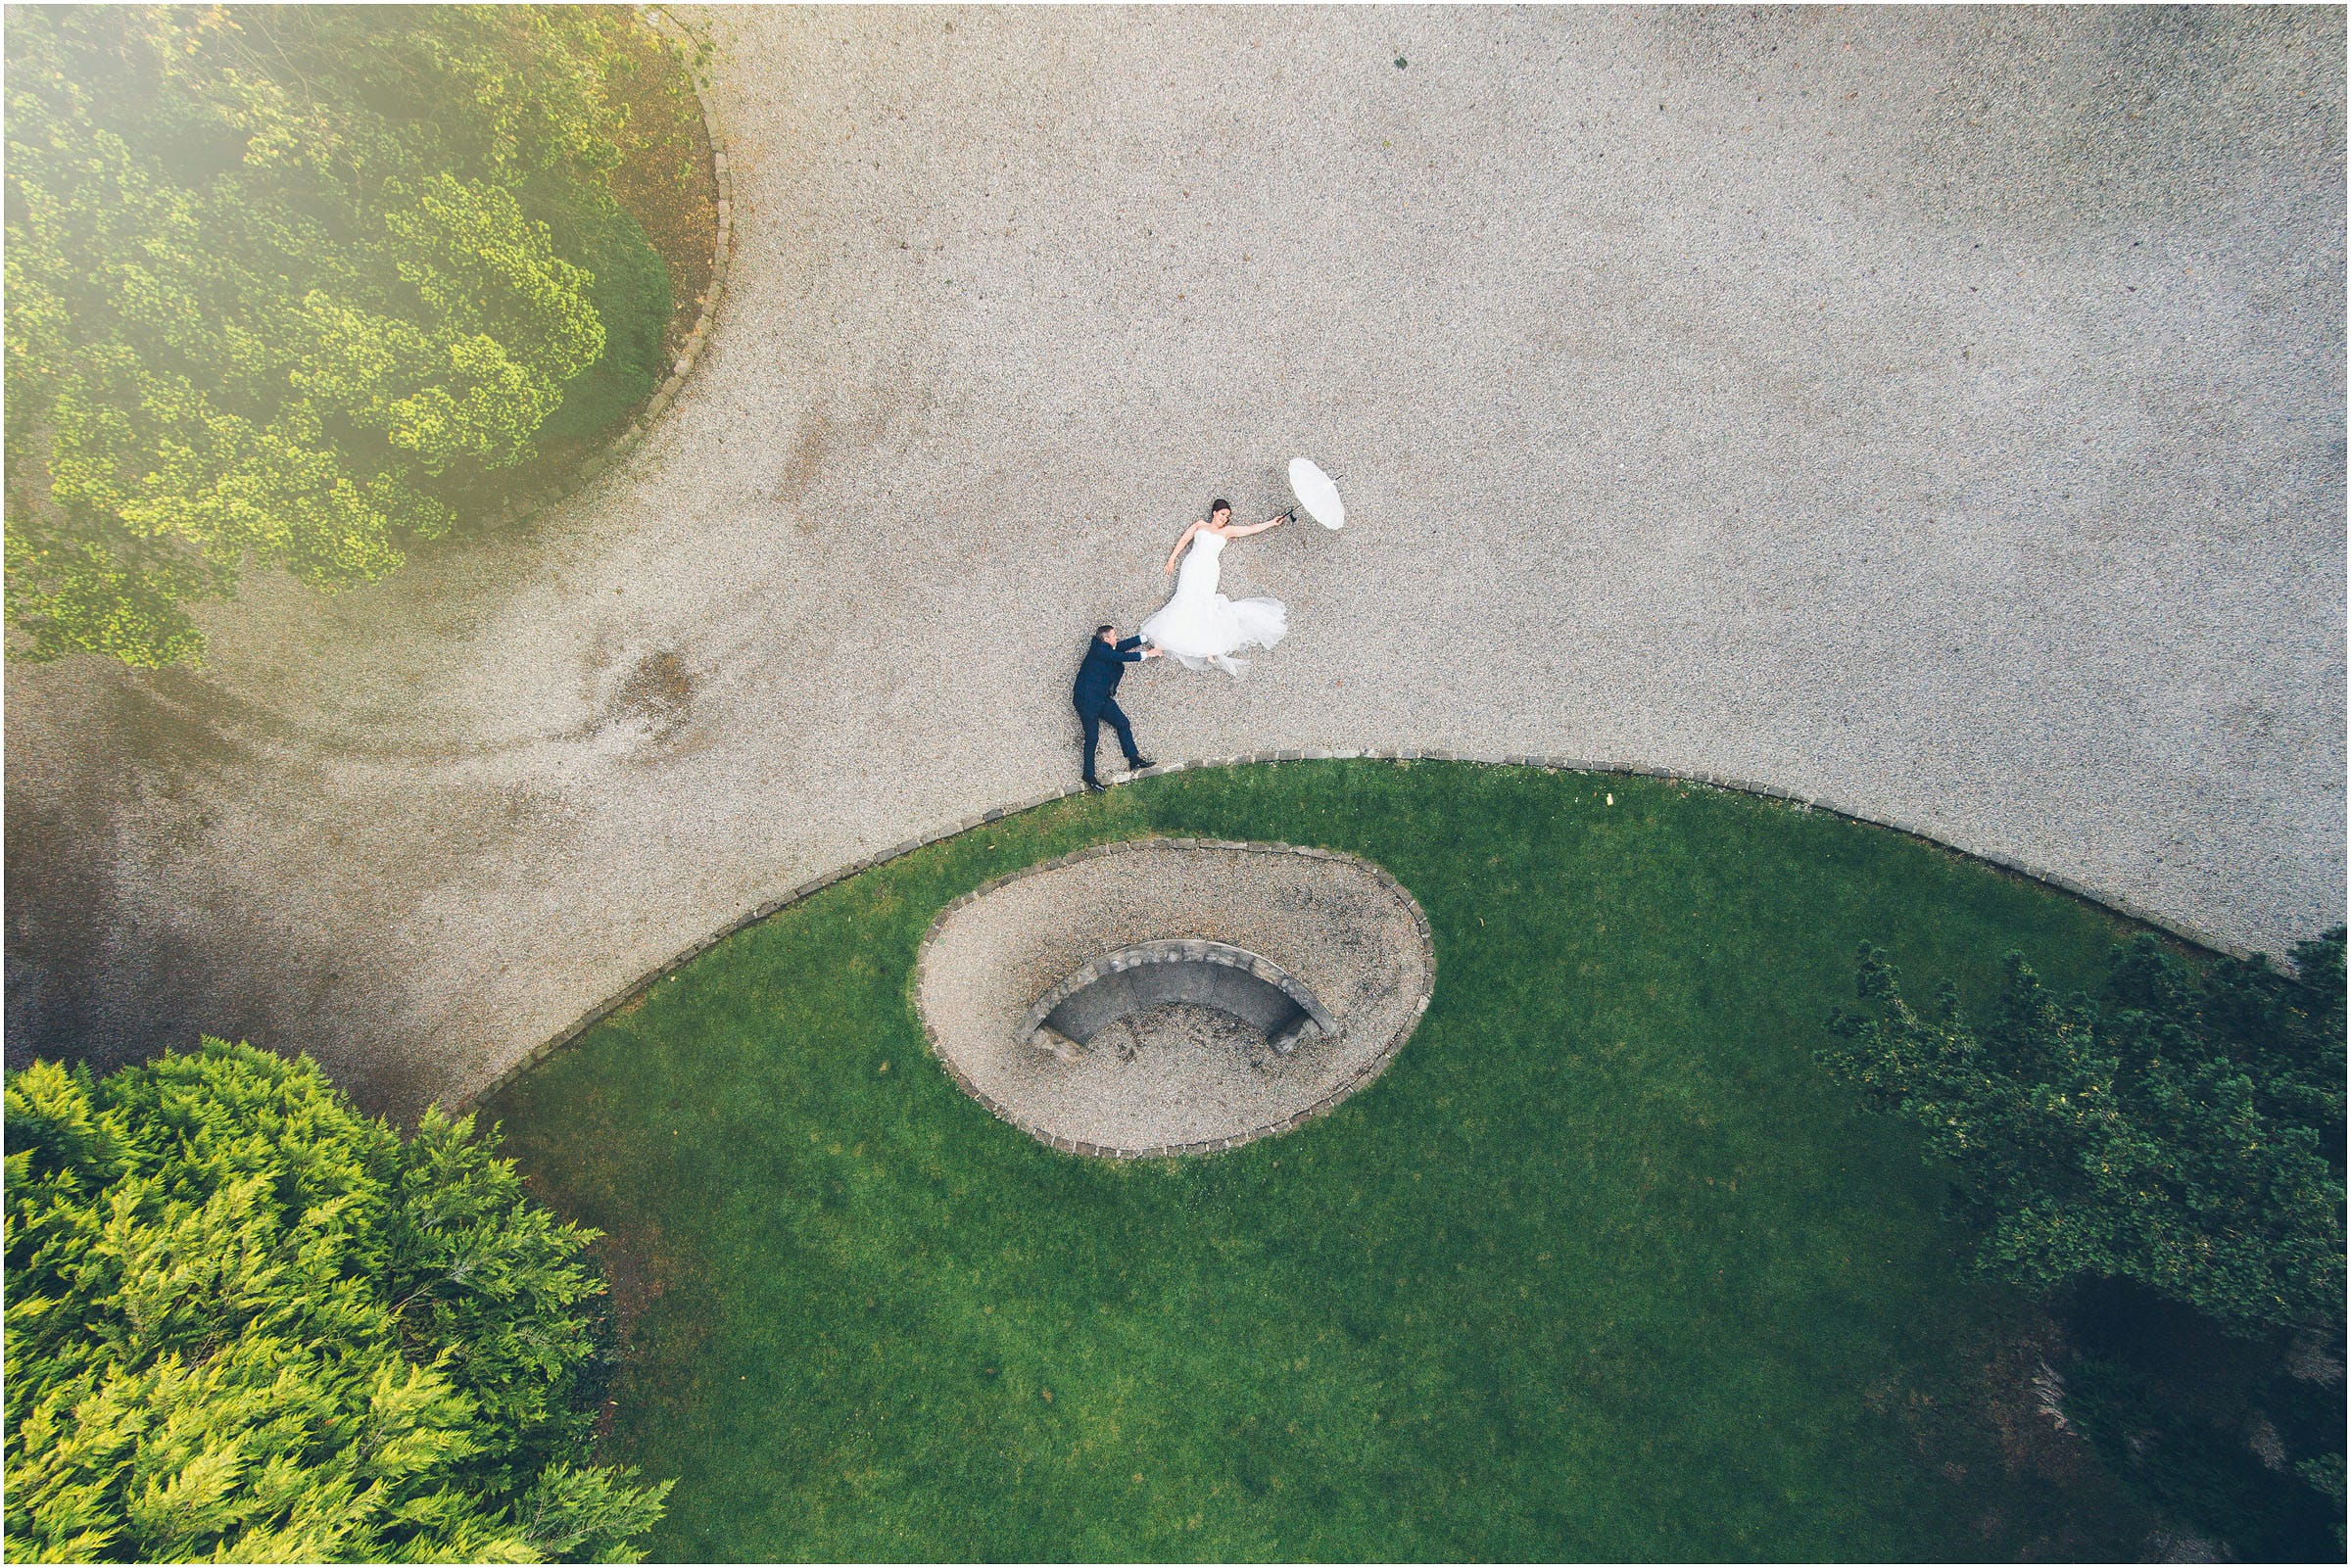 An amazing wedding photo taken by a drone at Mitton Hall in Manchester showing a couple with an umbrella looking like they're flying